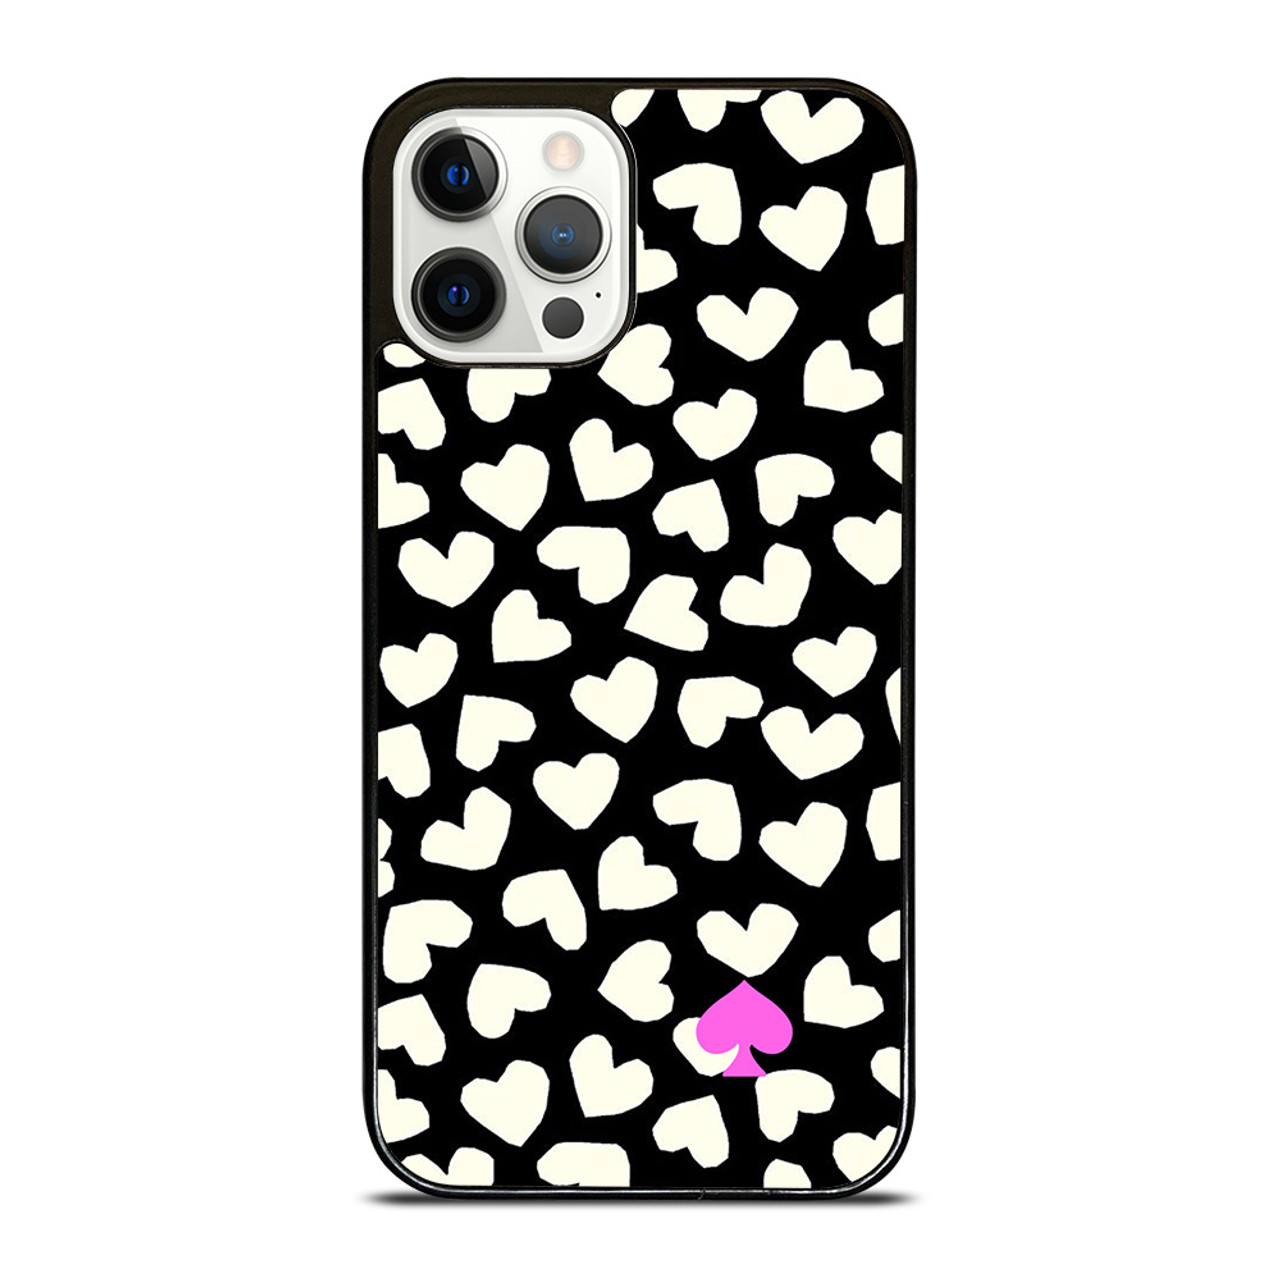 KATE SPADE LOVE HEART POLKADOTS iPhone 12 Pro Case Cover